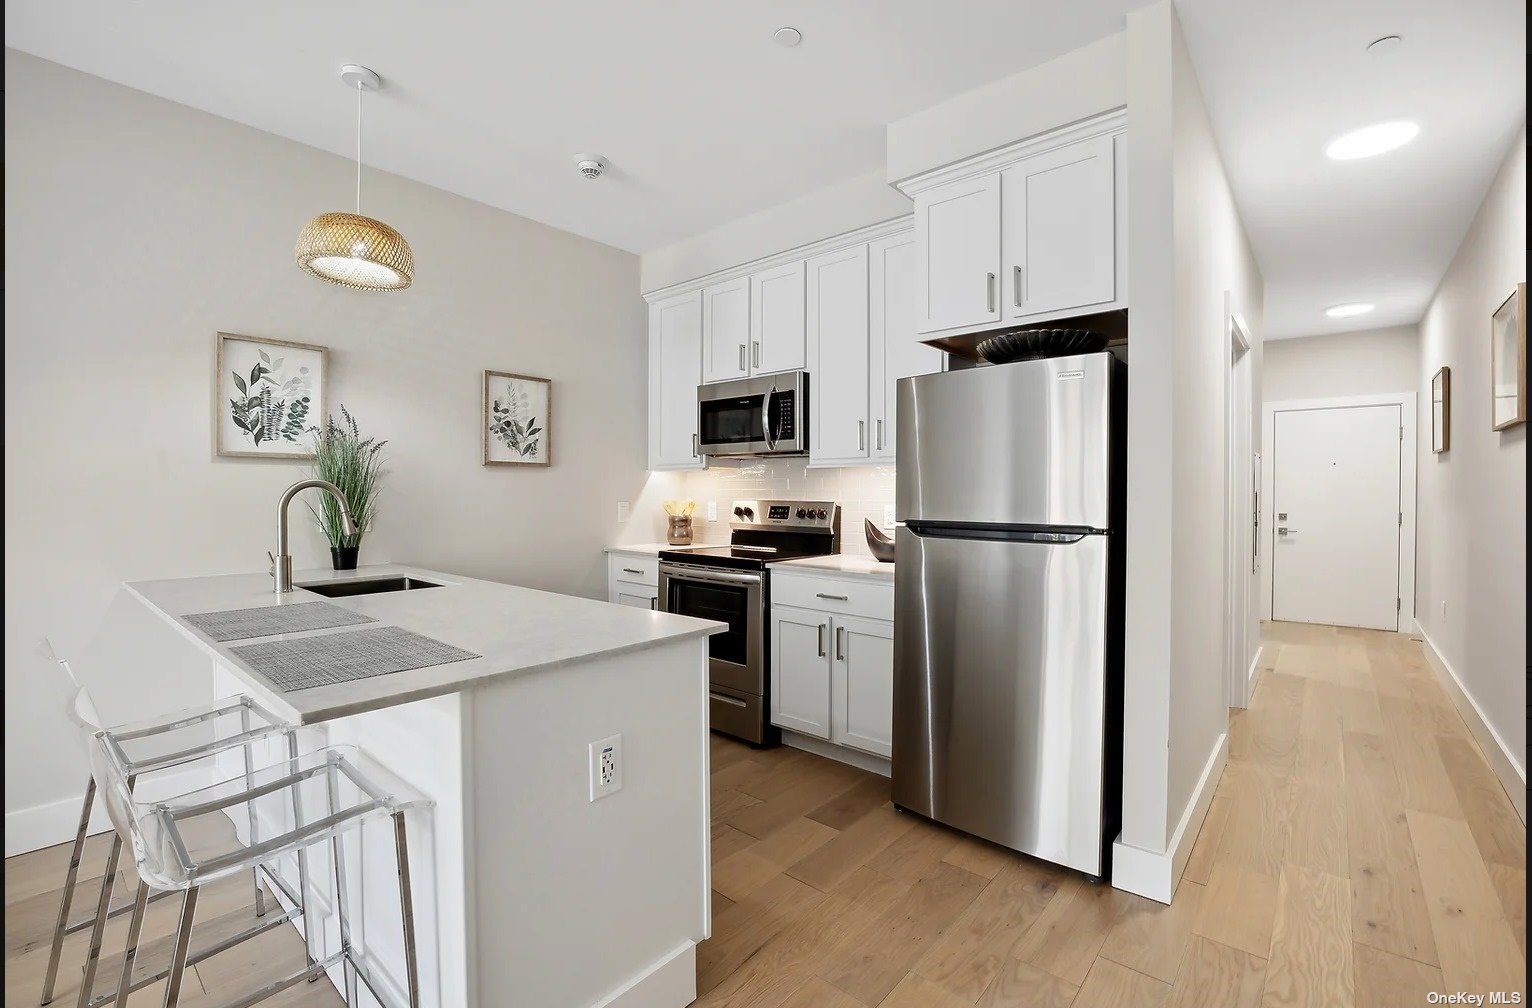 a kitchen with cabinets stainless steel appliances and a refrigerator